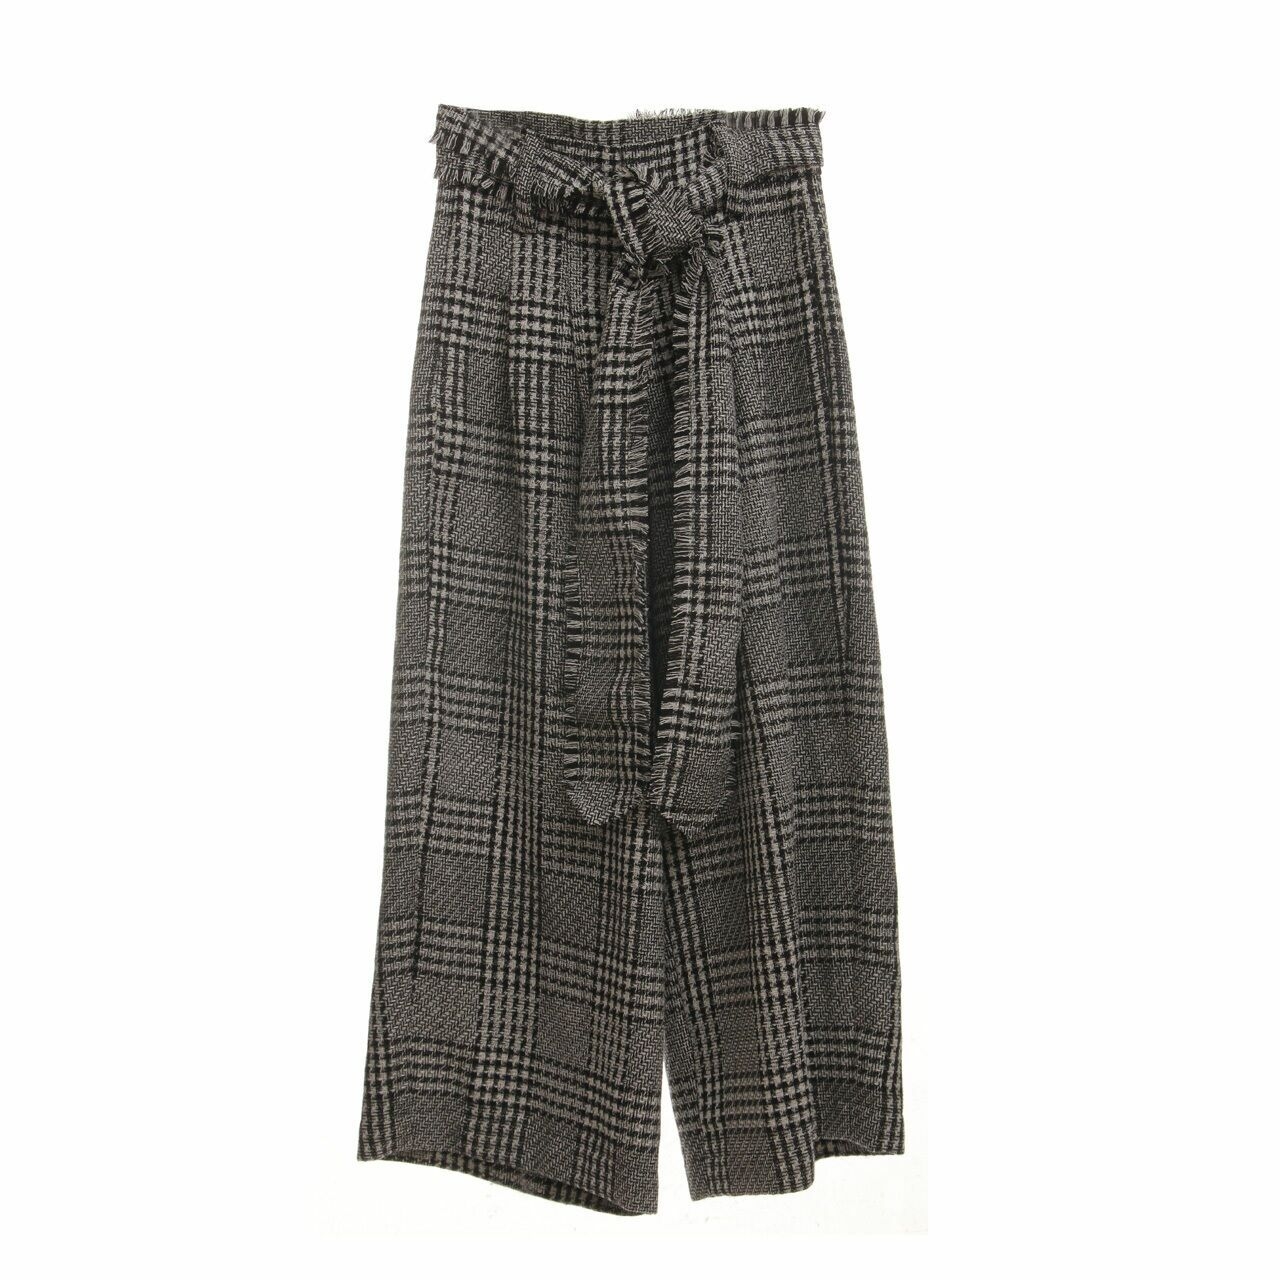 array Black & White Houndstooth Long Pants